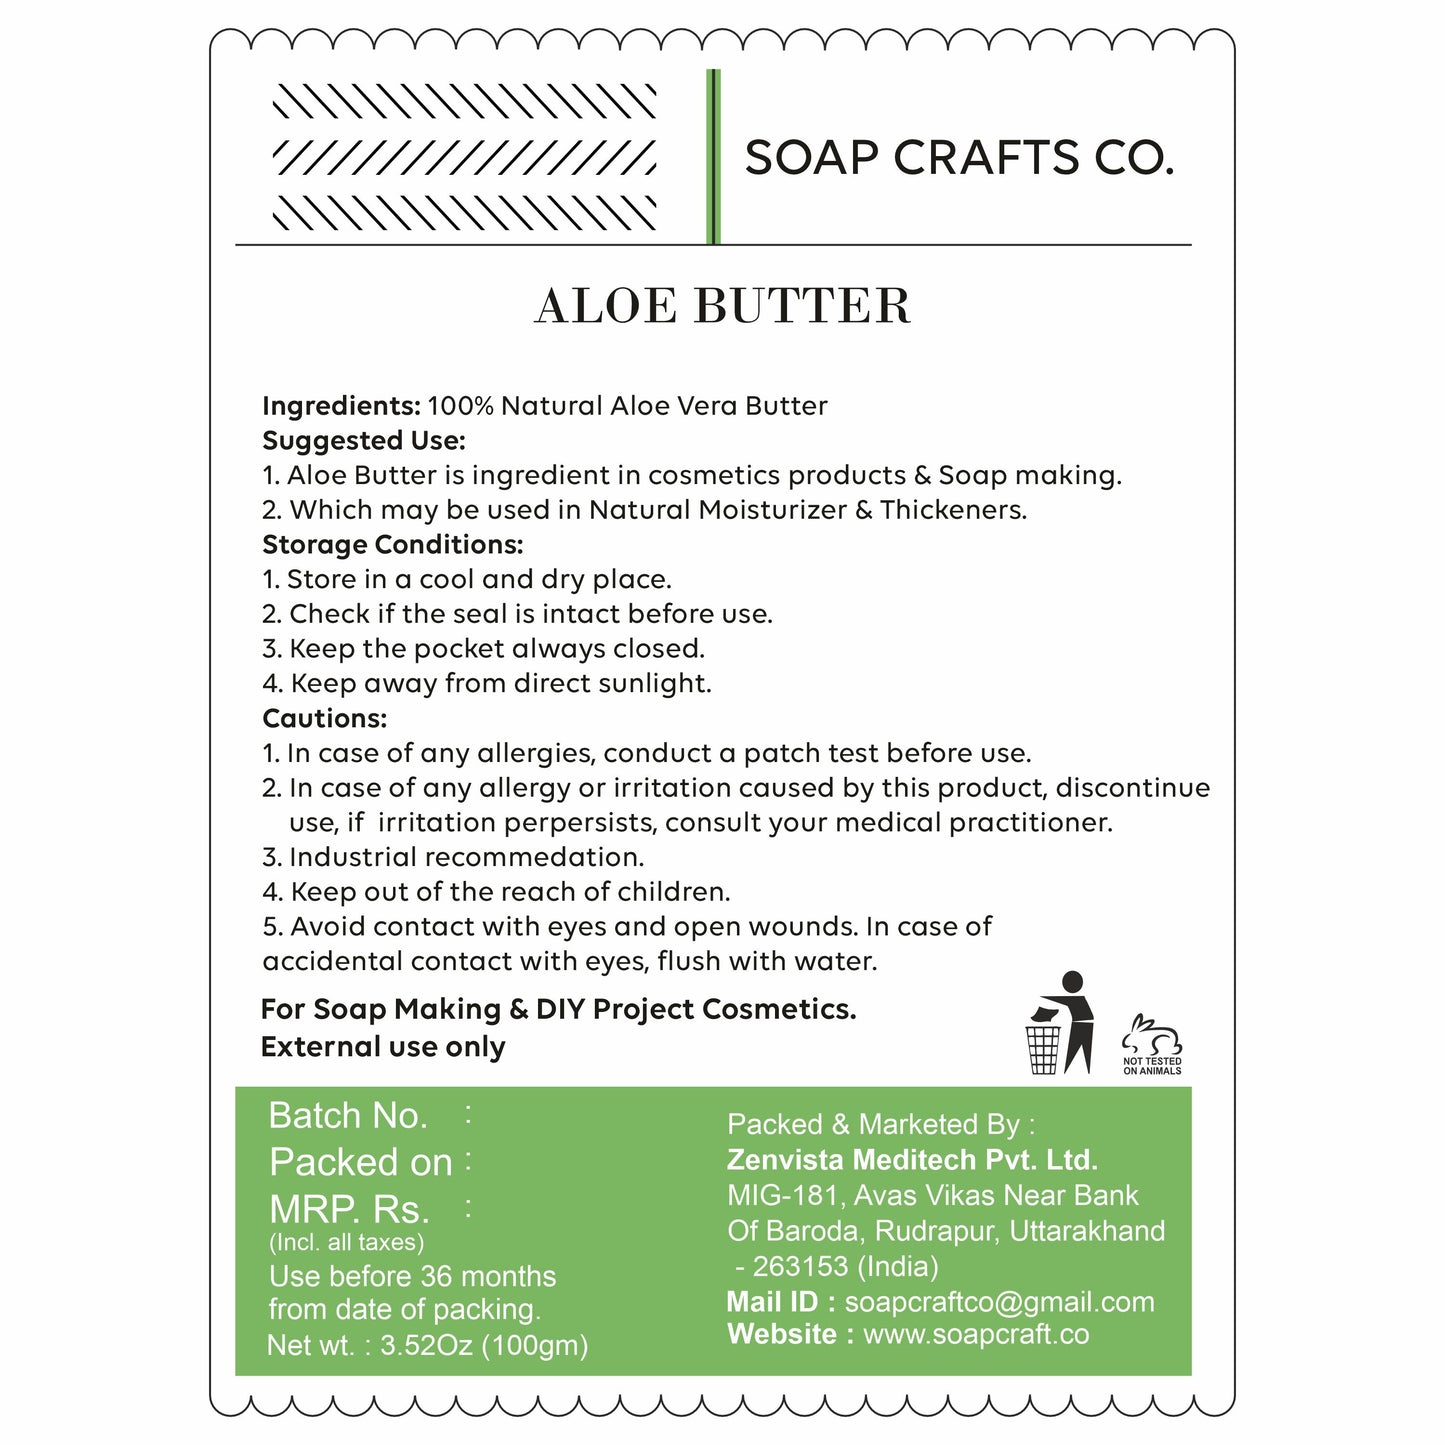 cosmeticmaking, saopmaking, cosmeticmakingingredients, soapmakingingredients,cosmeticingredients,naturalingredients,organicingredients,veganingredients, essentialoils,fragranceoils,carrieroils, carrieroils, butters, clays,botanicals,herbs,preservatives,emulsifiers,surfa ctants,thickeners, thickeners,exfoliants, borox powder